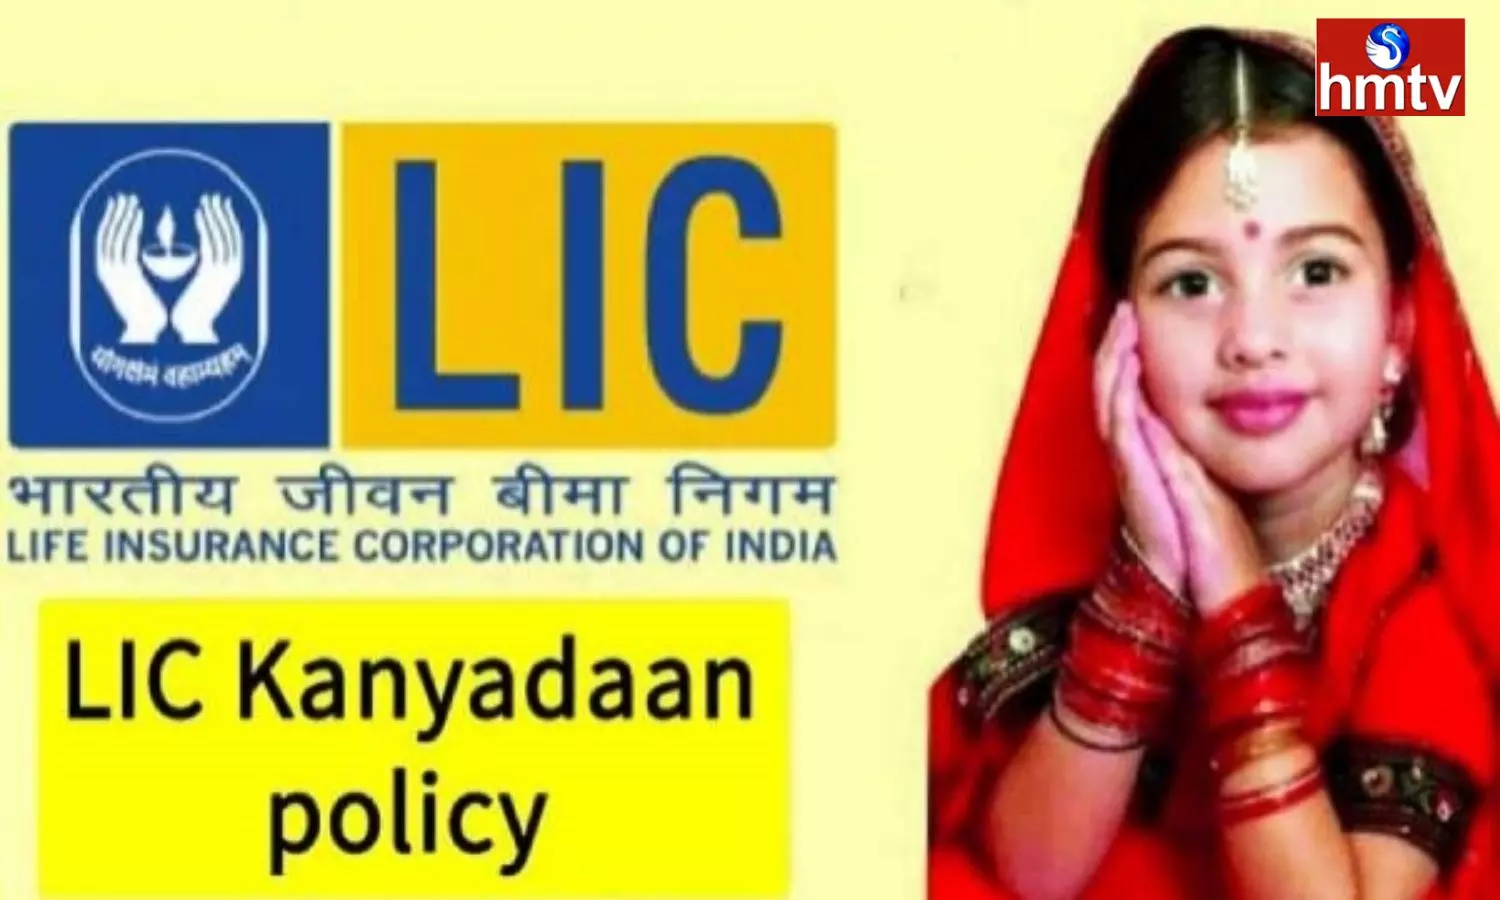 LIC Kanyadan Policy for Girl Child Marriage Check for all Details